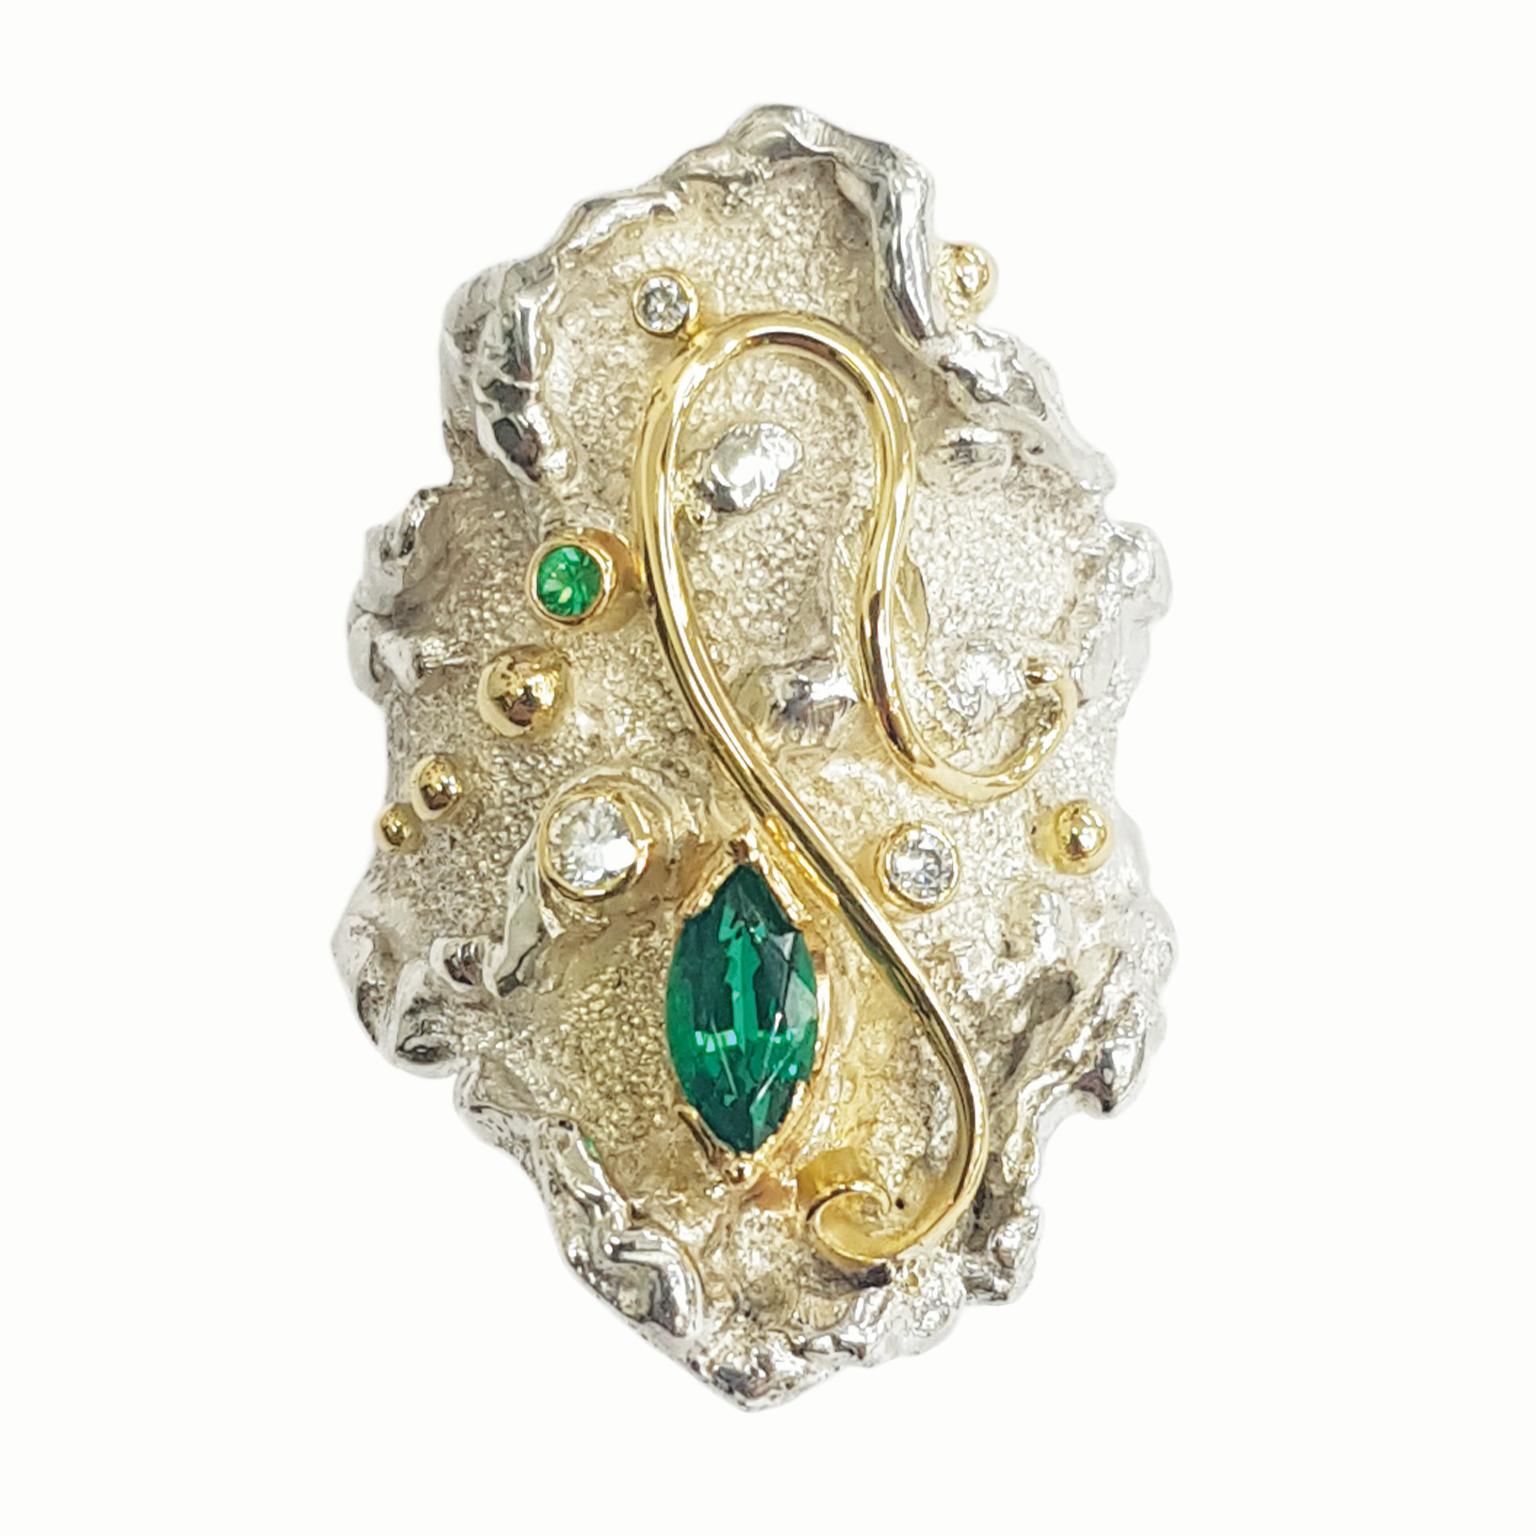 Paul Amey Sterling Silver, 18K Gold, Emerald and Diamond Ring